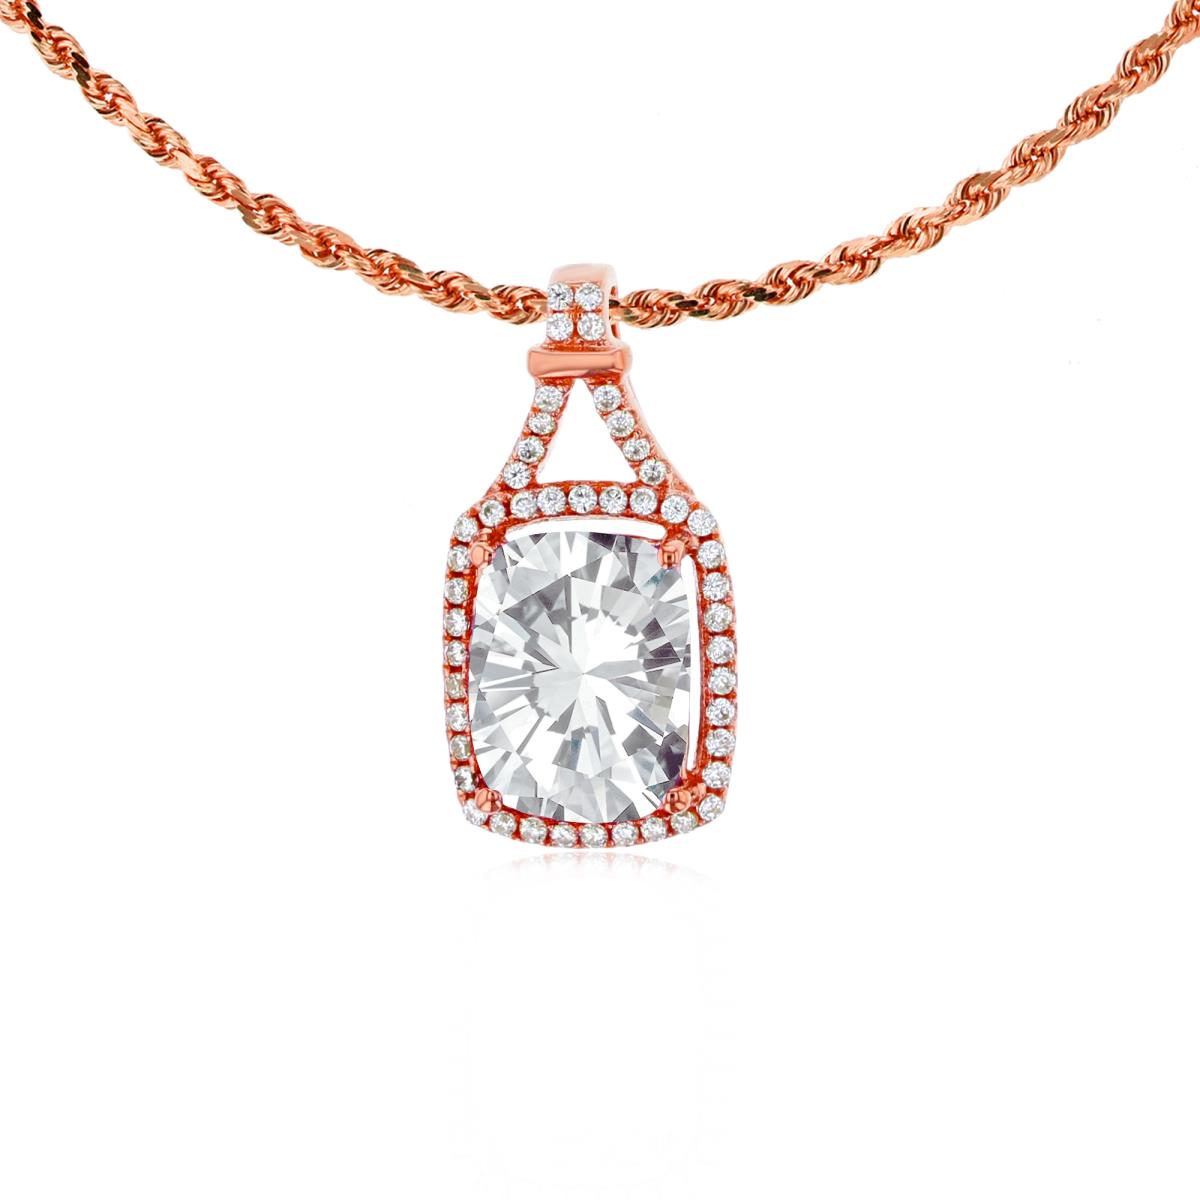 10K Rose Gold 8x6mm Cushion White Topaz & 0.13 CTTW Rd Diamonds Halo 18" Rope Chain Necklace